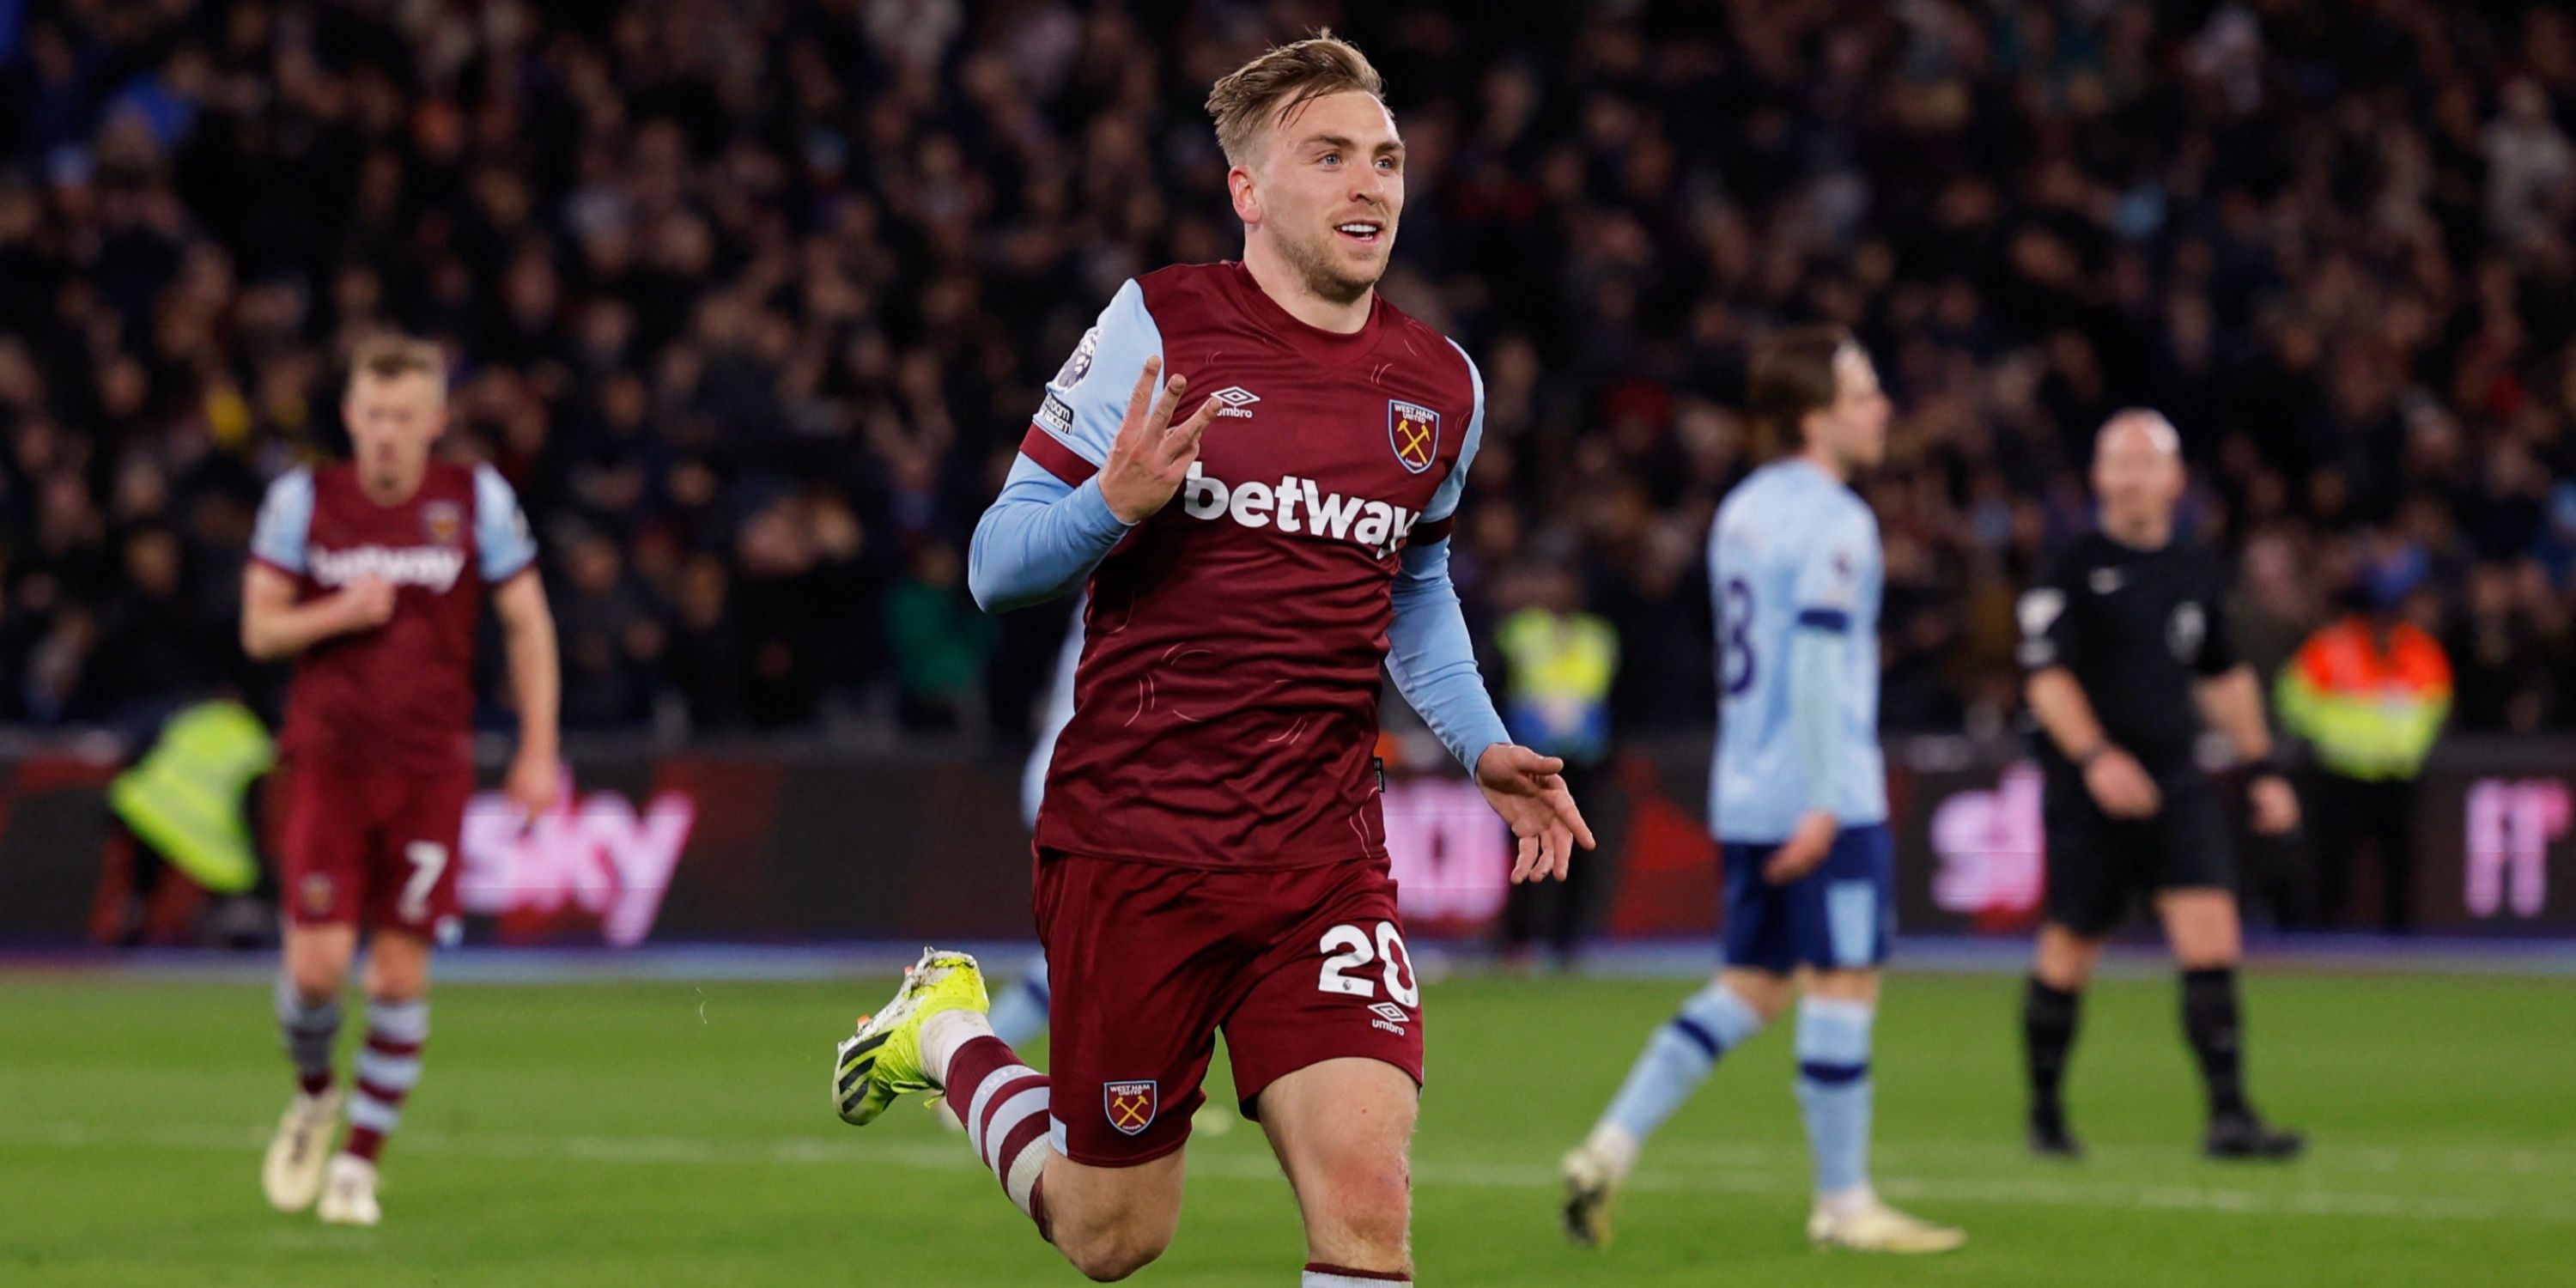 west ham star whose value has risen by £29m is now even better than bowen